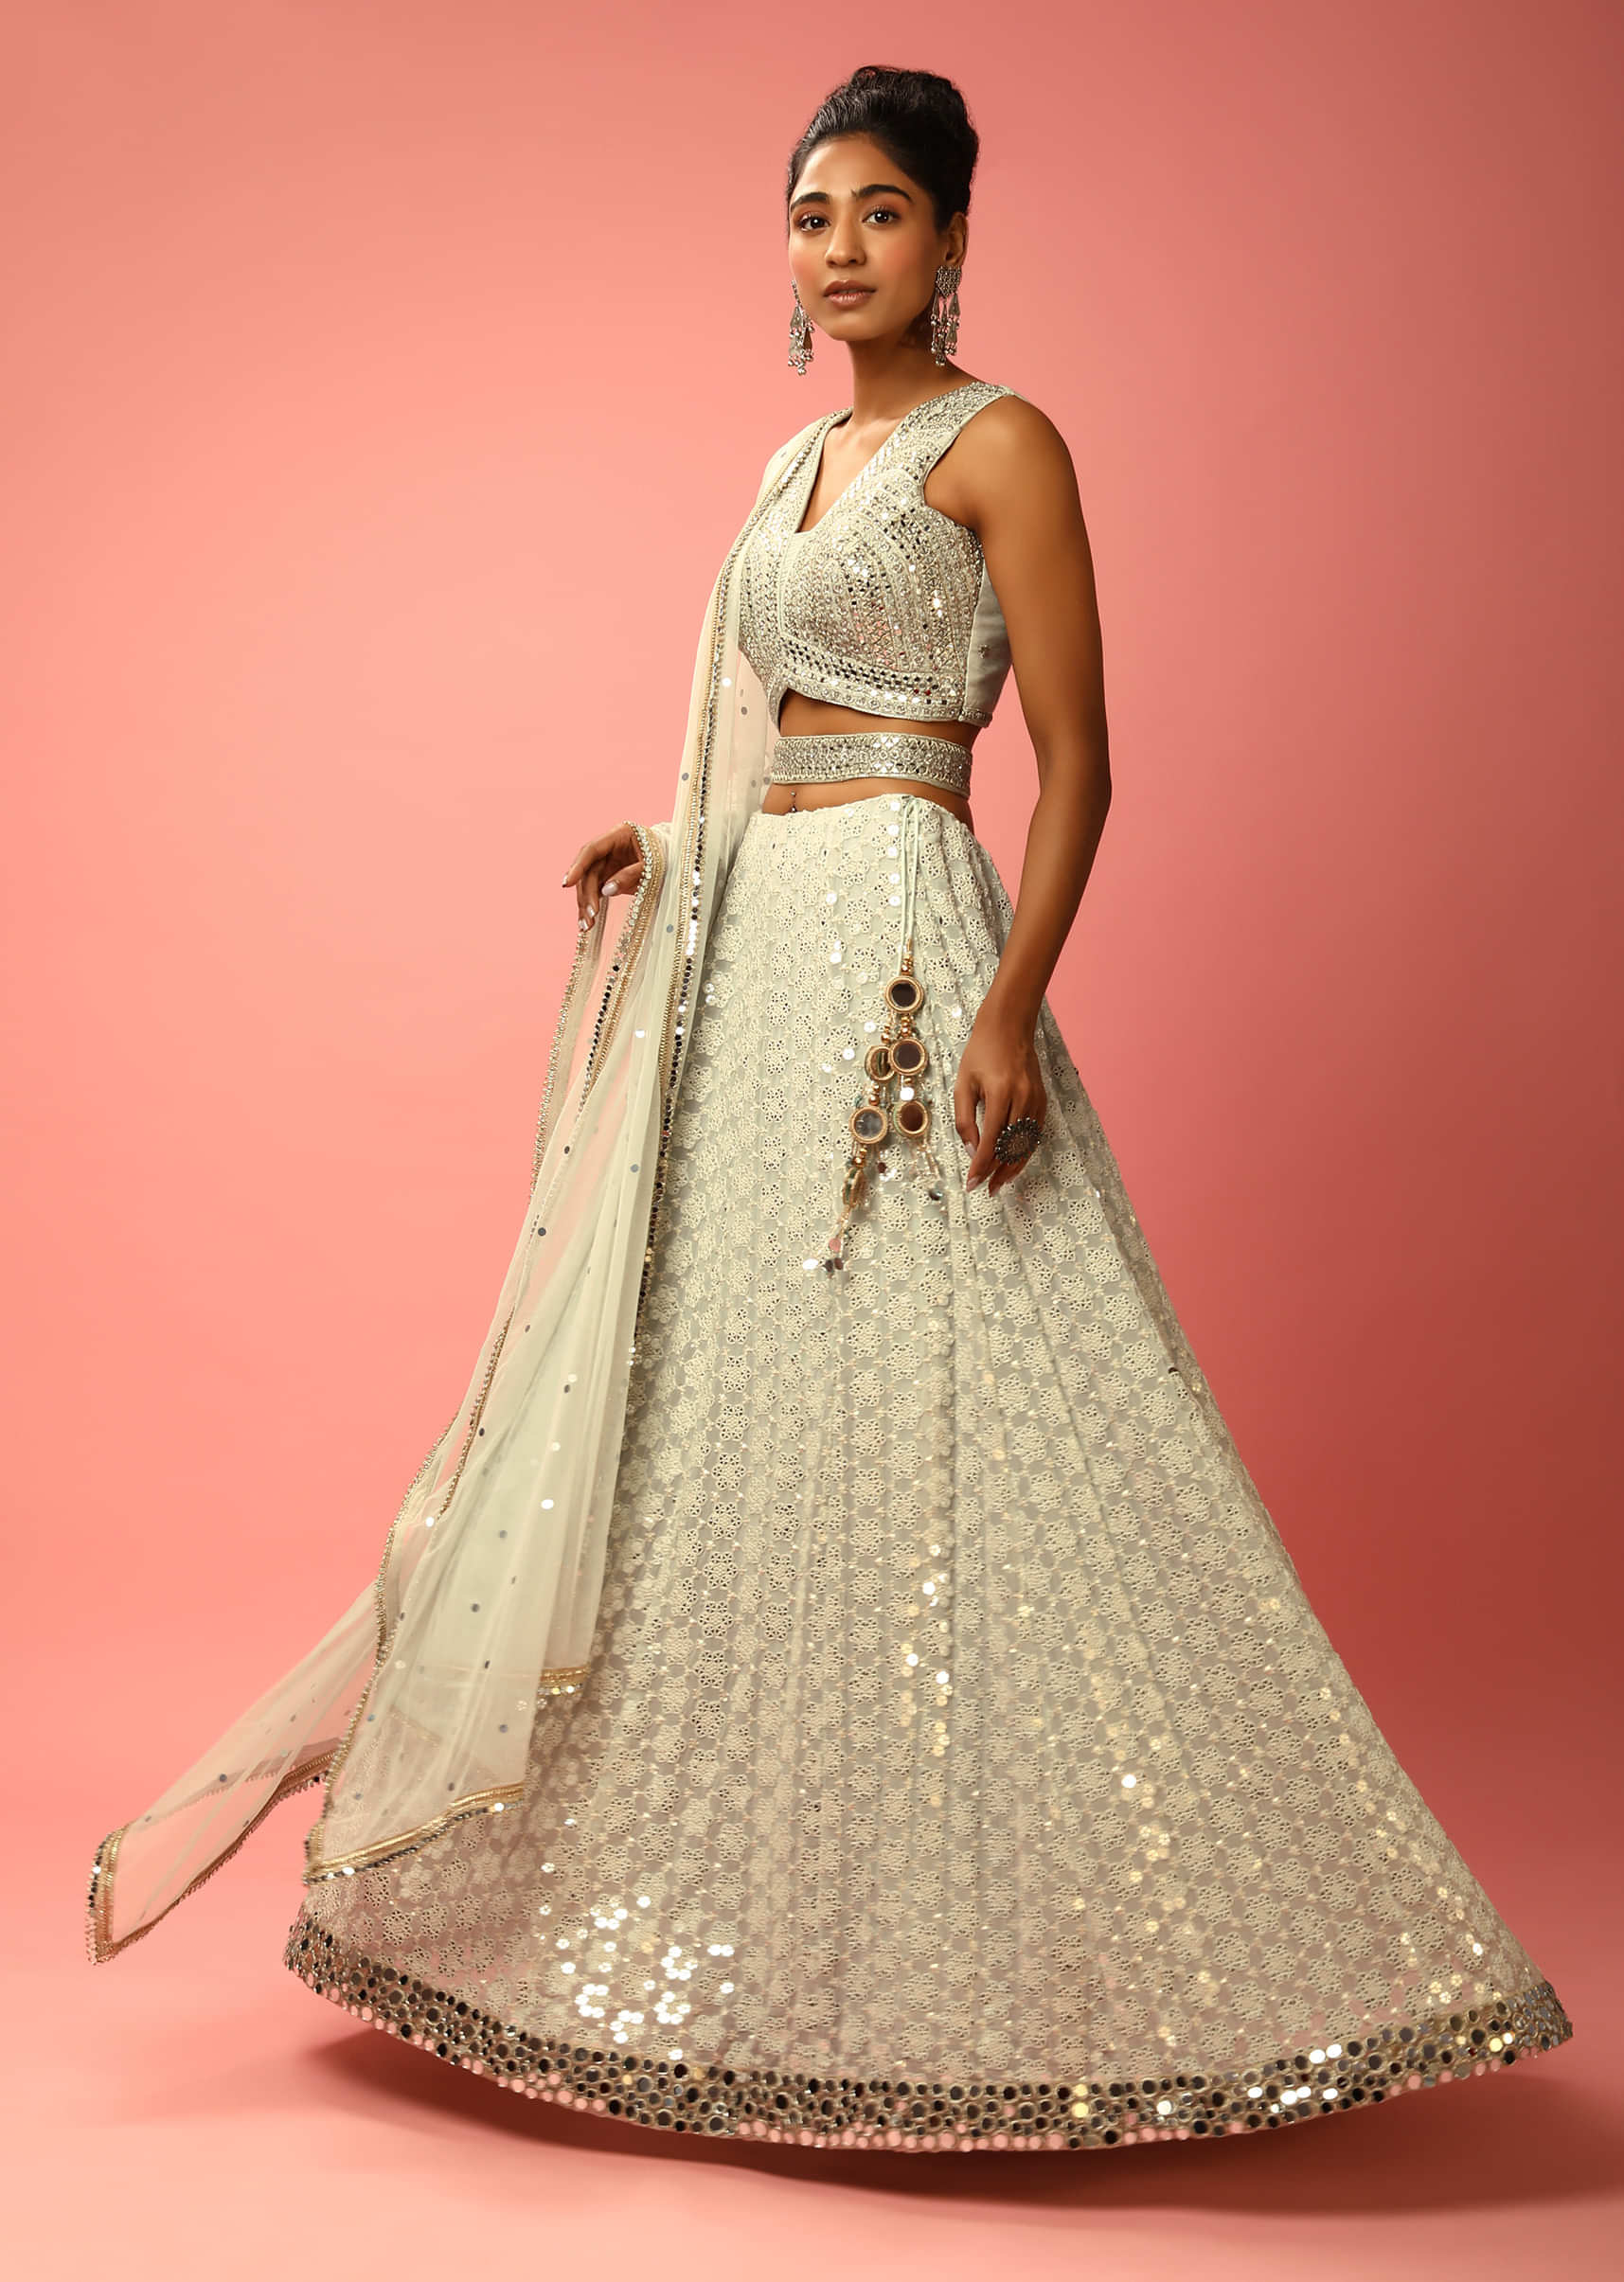 Cloud Grey Lehenga Choli In Georgette With Sequins Embroidered Jaal And Mirror Border 